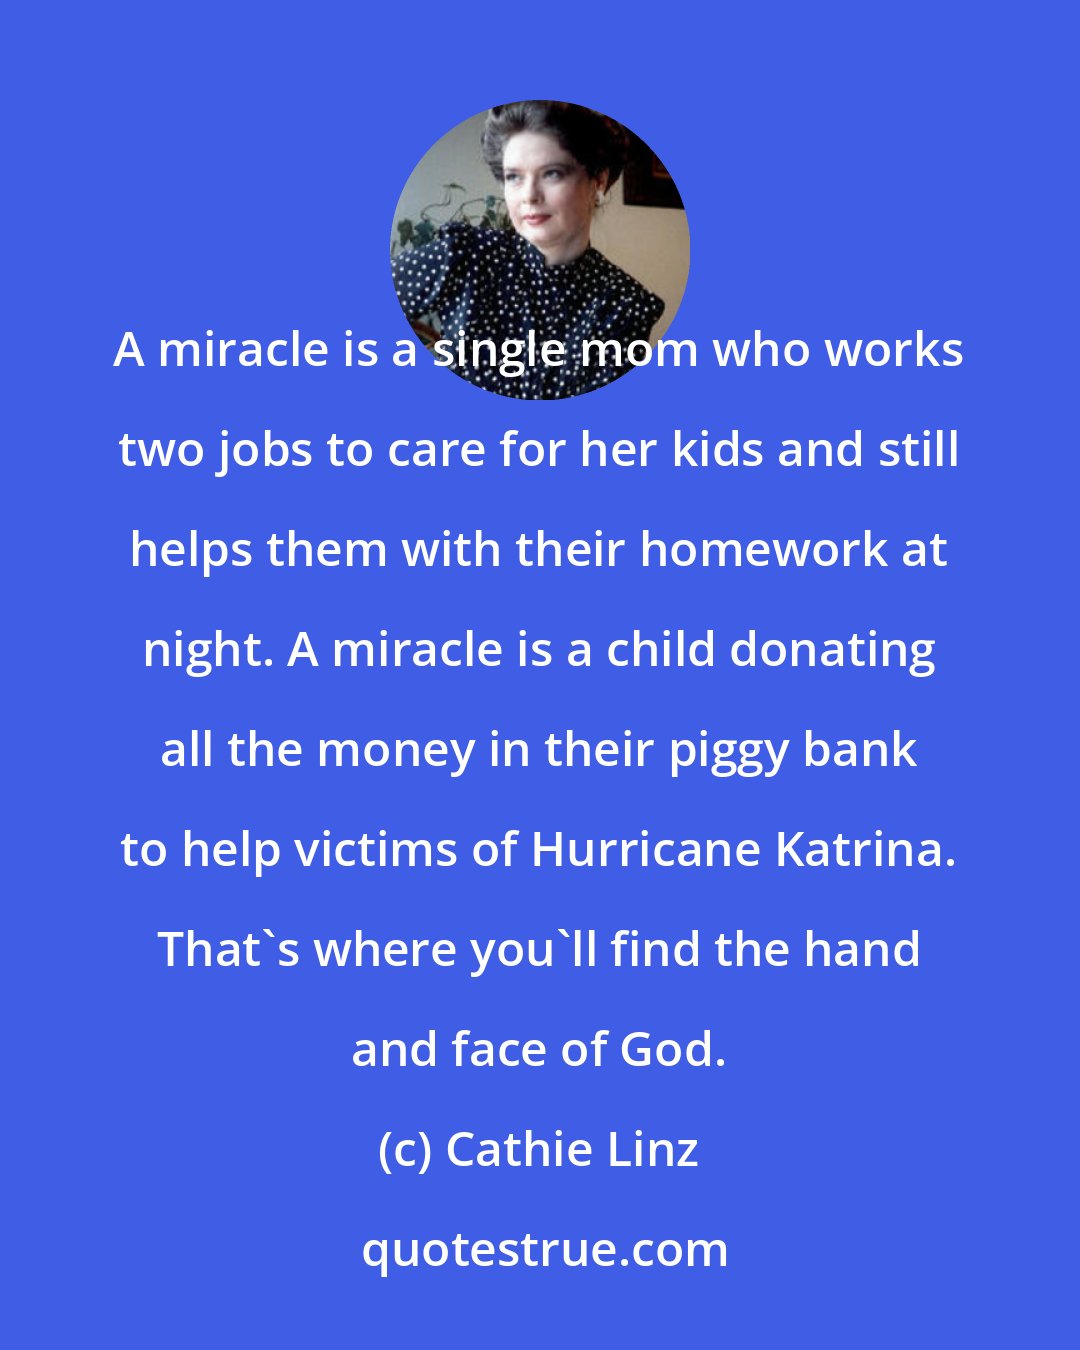 Cathie Linz: A miracle is a single mom who works two jobs to care for her kids and still helps them with their homework at night. A miracle is a child donating all the money in their piggy bank to help victims of Hurricane Katrina. That's where you'll find the hand and face of God.